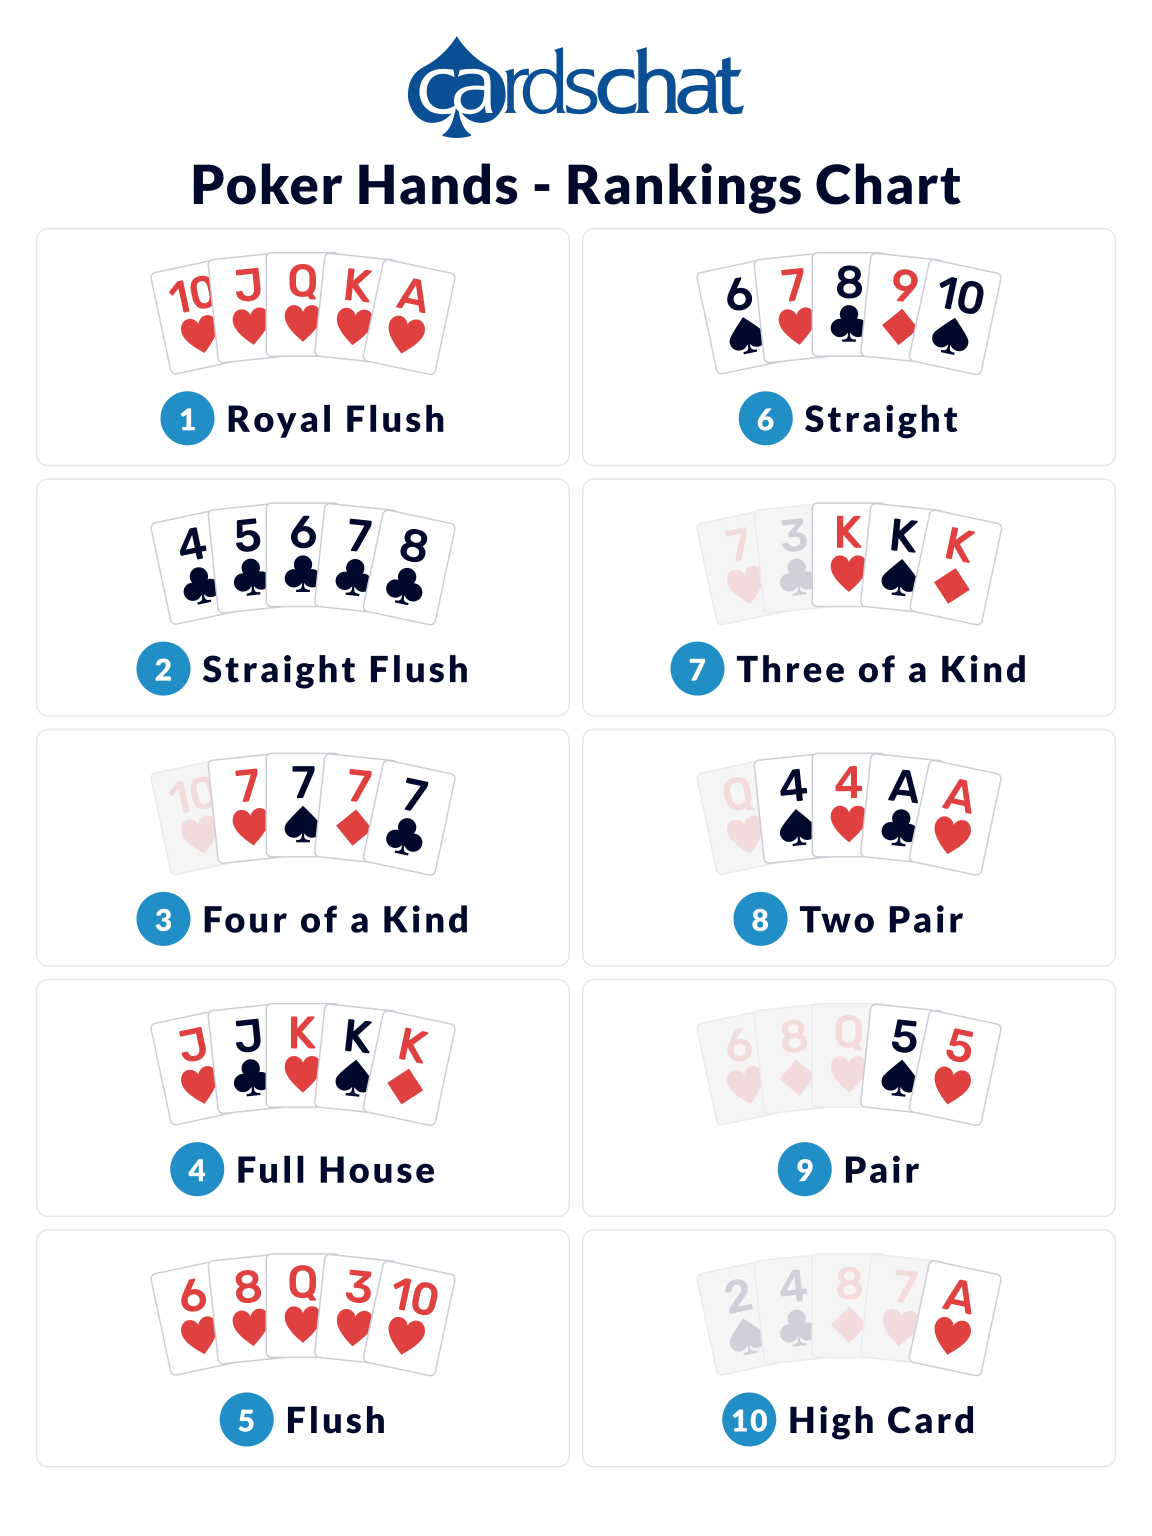 underkjole guide Tablet Poker Hand Rankings & Poker Hands Chart ⇛ All You Need to Know